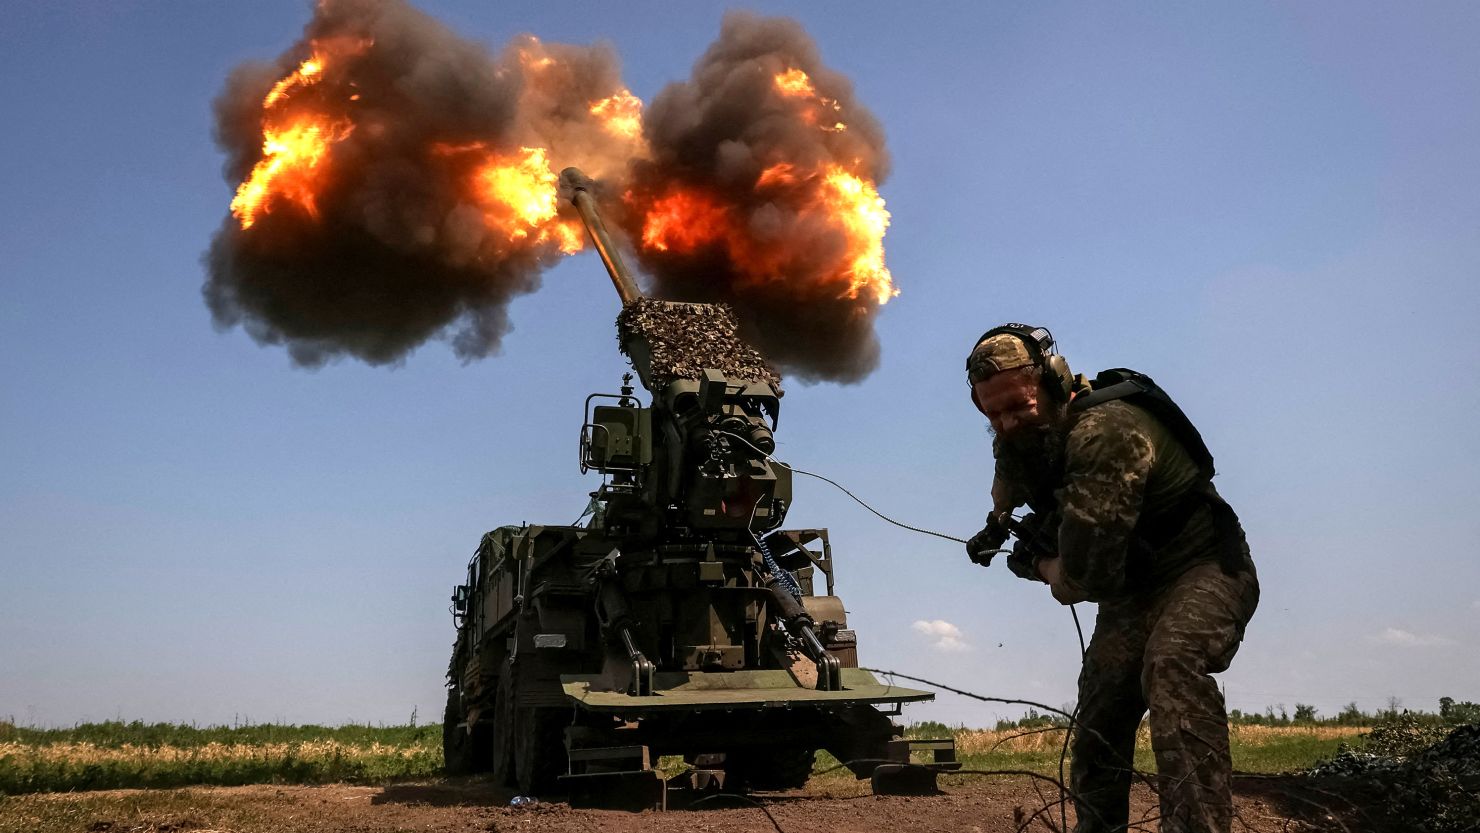 A Ukrainian serviceman fires toward Russian troops at a position near the city of Bakhmut in the Donetsk region of Ukraine on July 5.